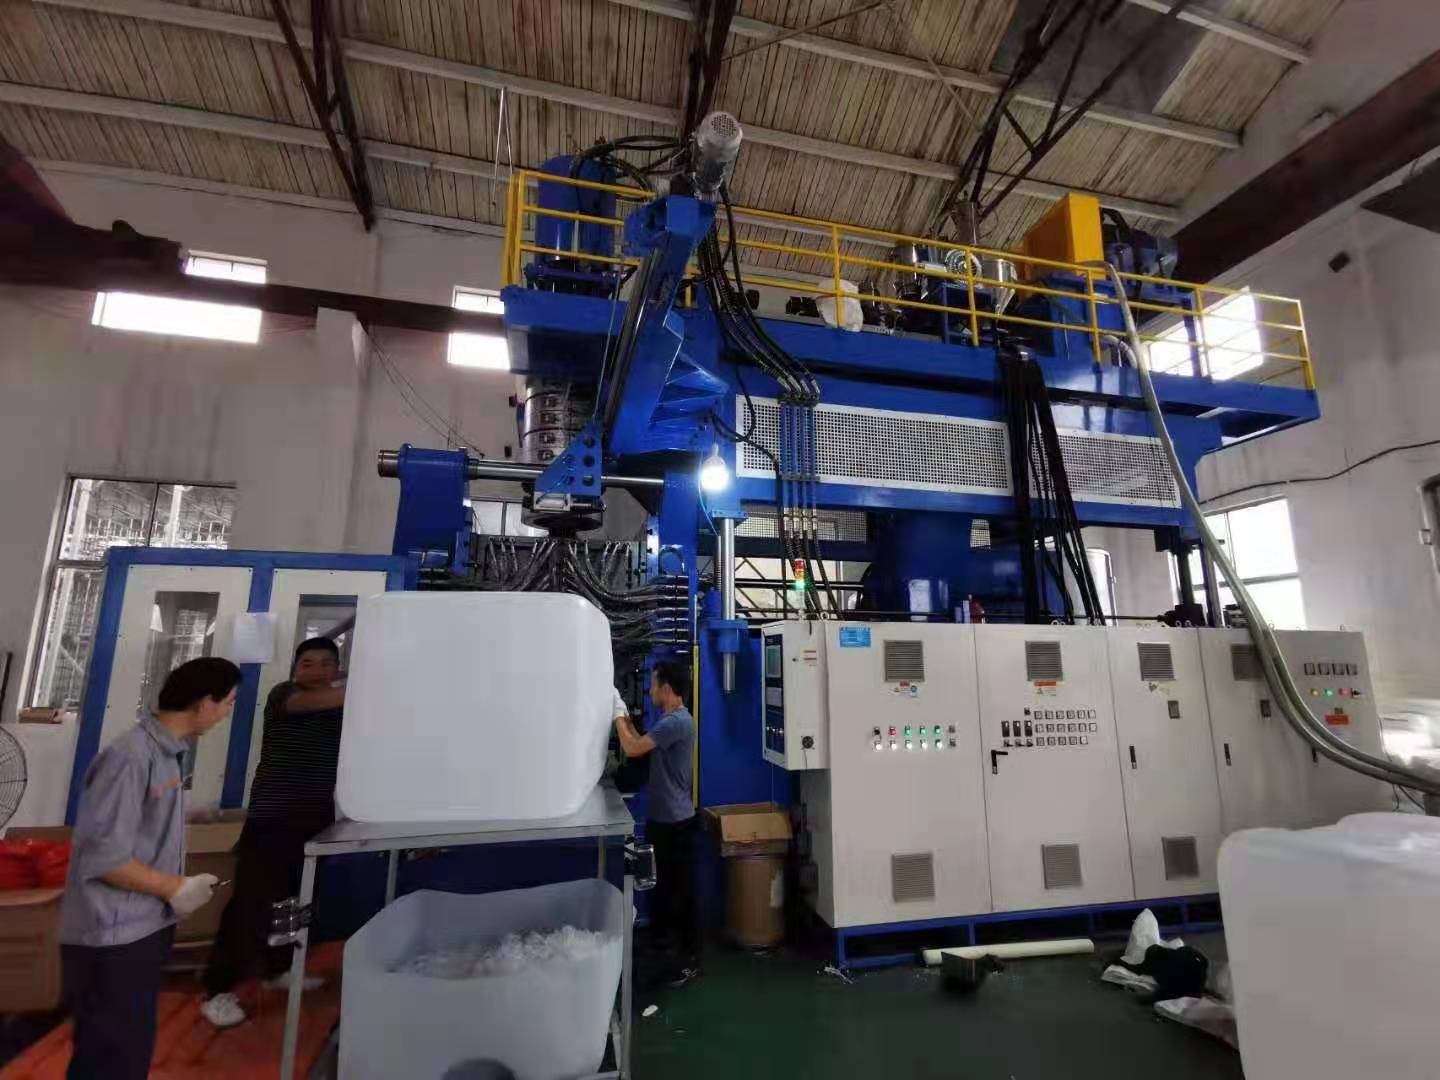 Plastic 1000L IBC tank container water tank blow molding machine production line